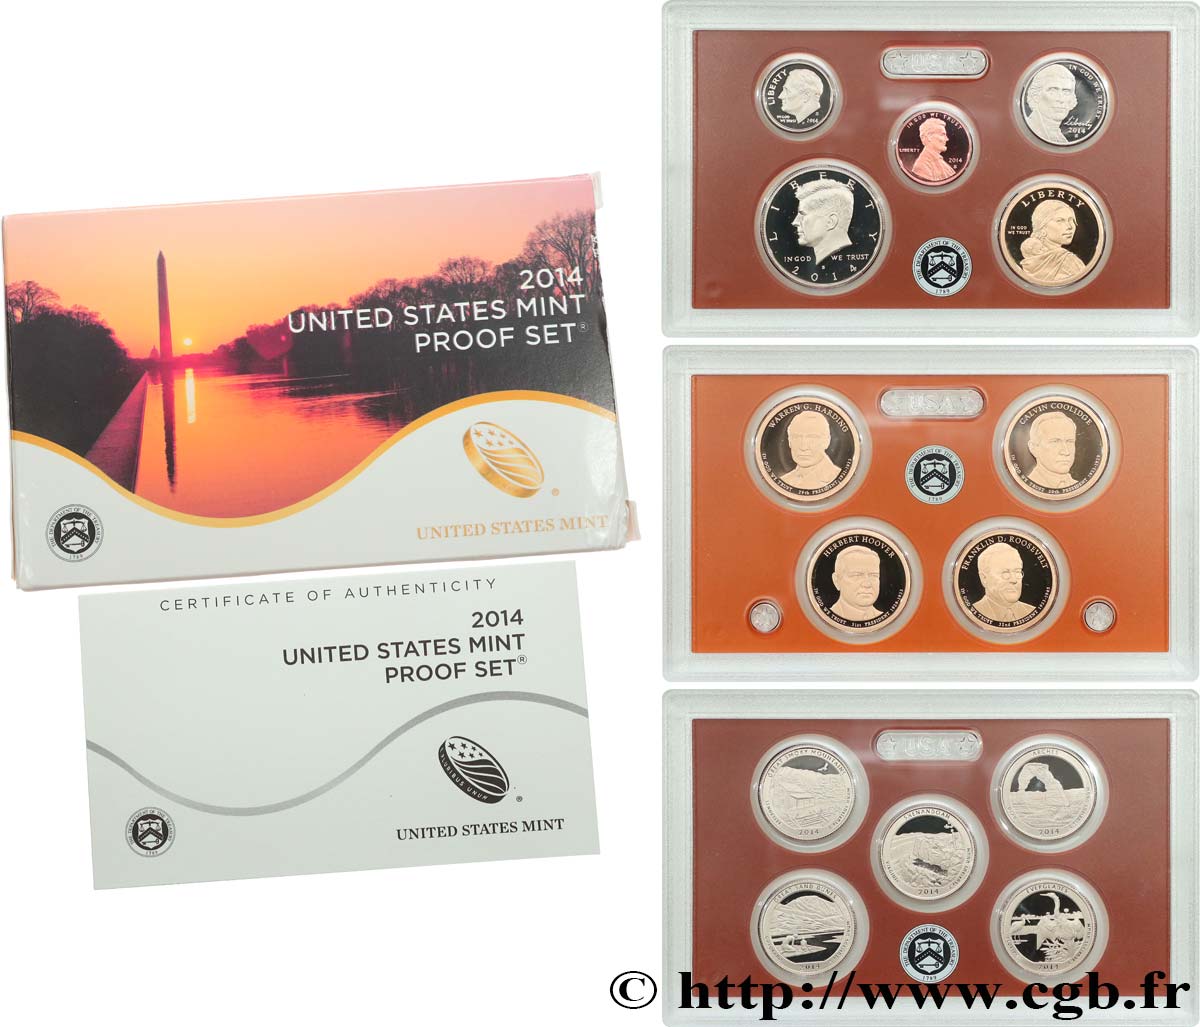 UNITED STATES OF AMERICA PROOF SET - 14 monnaies 2014 S- San Francisco MS 